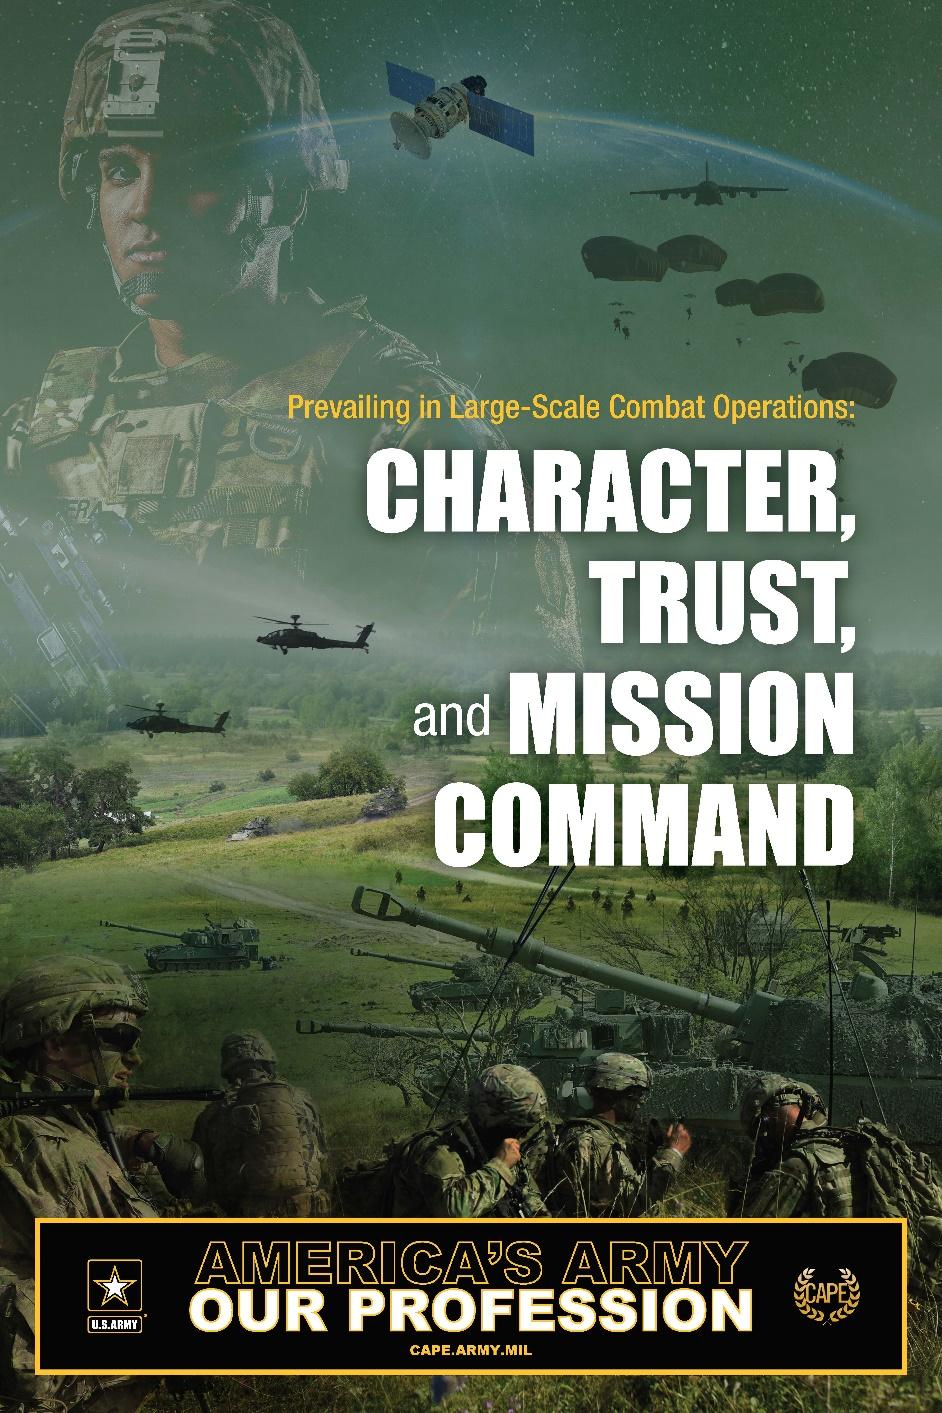 Developing character in ourselves and others strengthens our shared identity as Trusted Army Professionals.